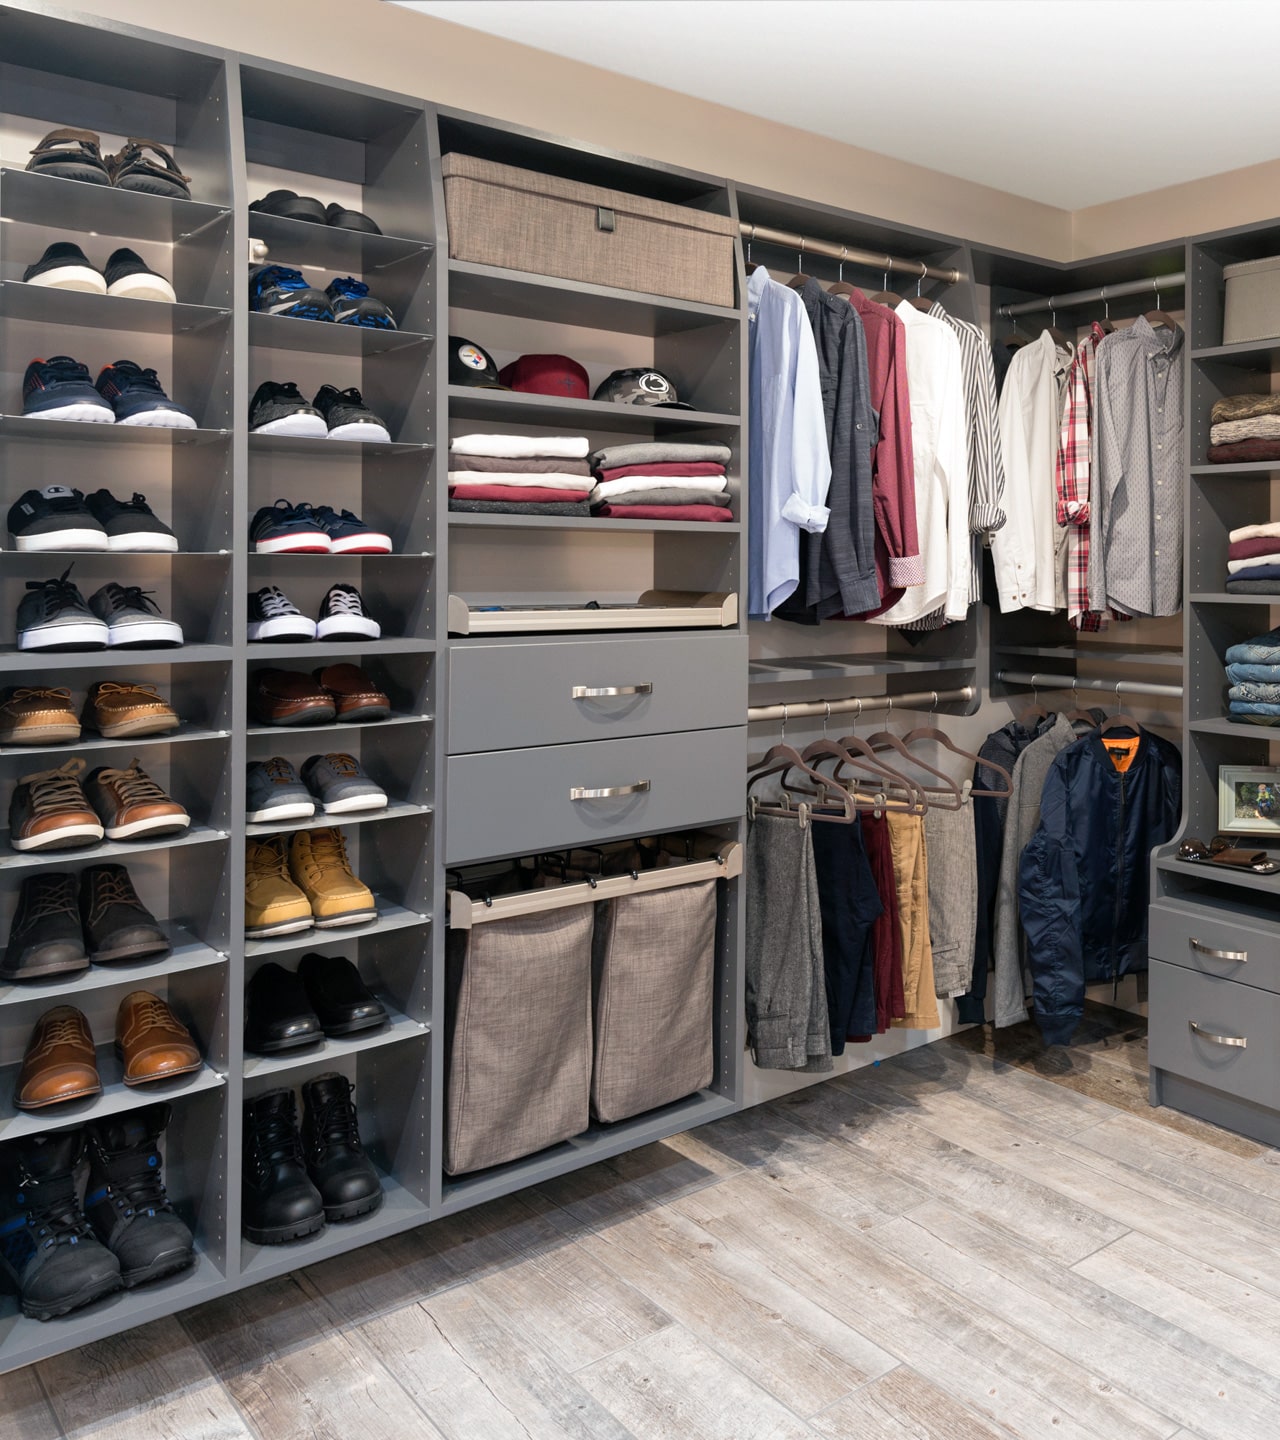 Inspired Closets Shelves and and hanger racks shoes, shirts, hats and other belongings